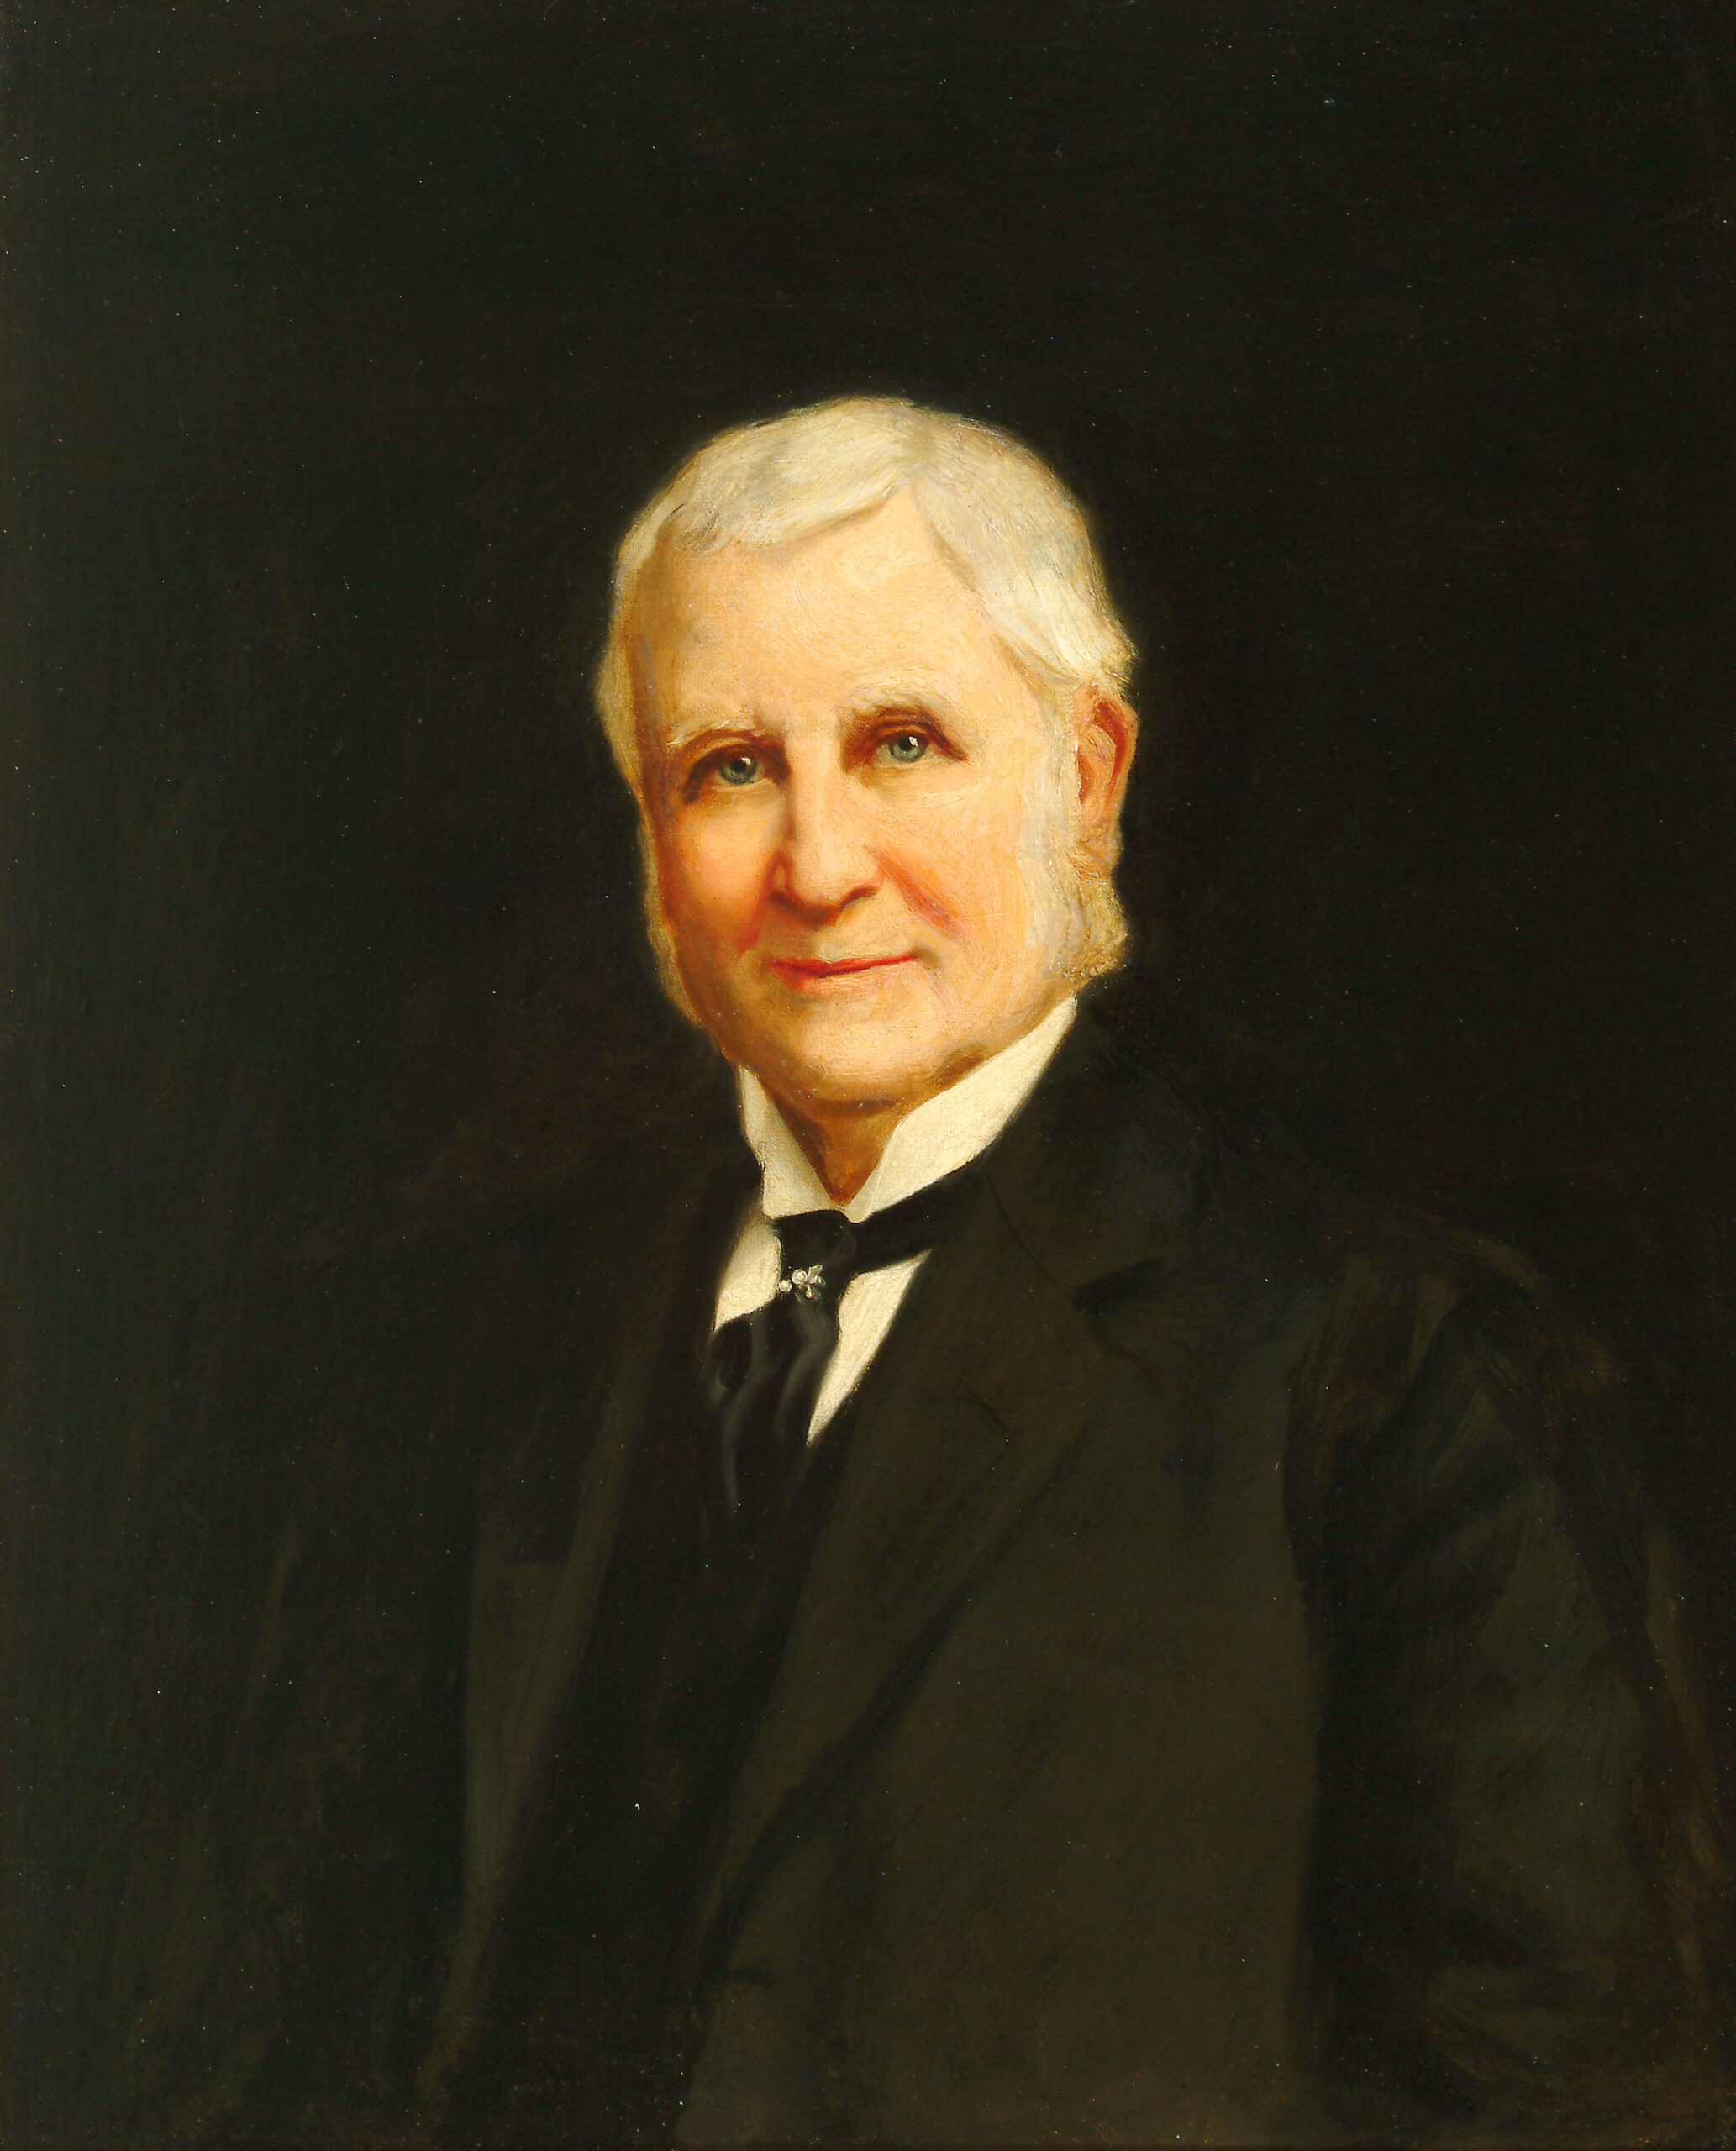 AMERICAN SCHOOL Portrait of William van Duzer Lawrence, oil on canvas, 32 x 26 inches. Gift of Mr. and Mrs. Robert Underhill